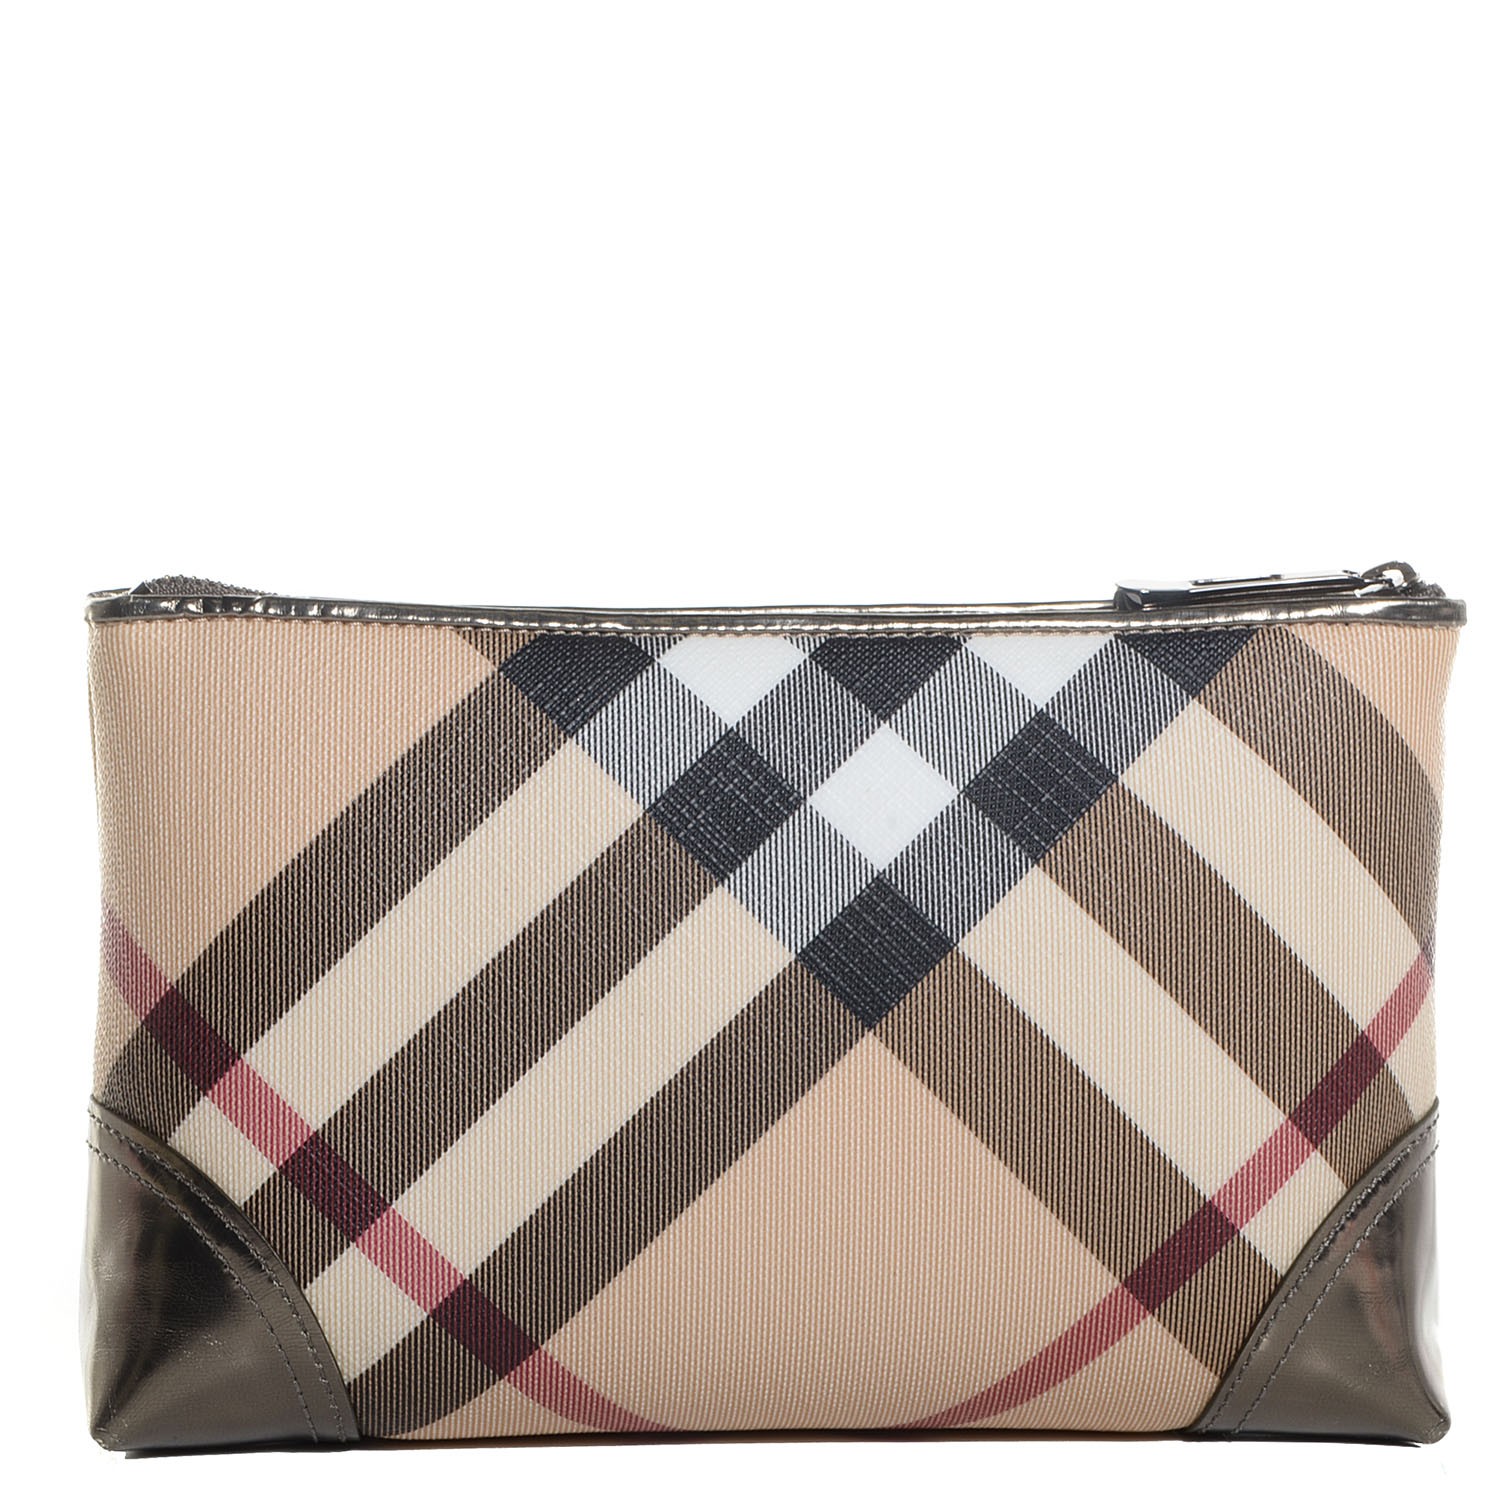 Burberry Cosmetic Bag Hotsell, 56% OFF 